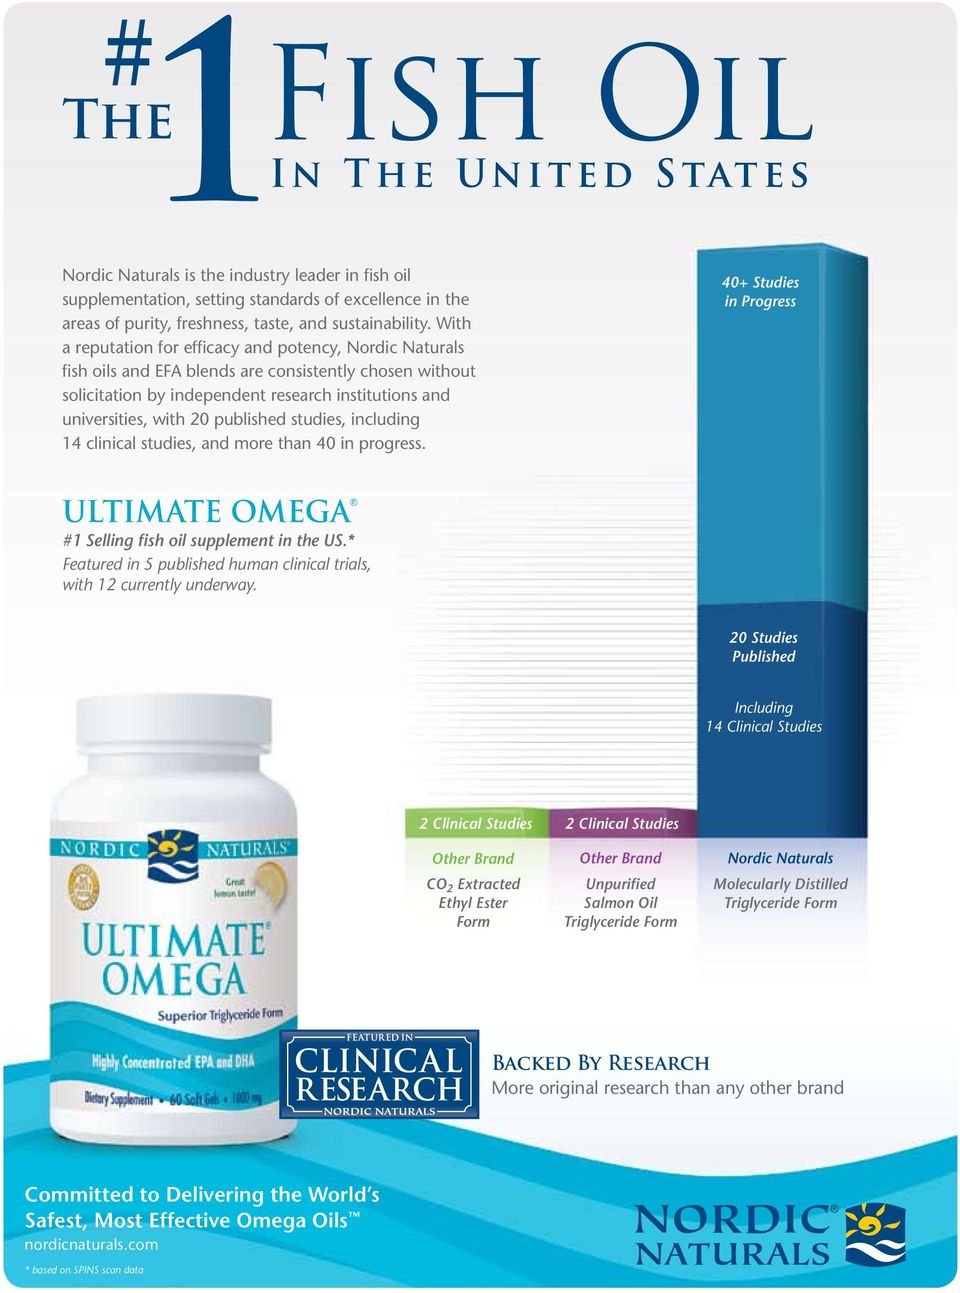 published studies, including 14 clinical studies, and more than 40 in progress. 40+ Studies in Progress ultimate omega #1 Selling fish oil supplement in the US.